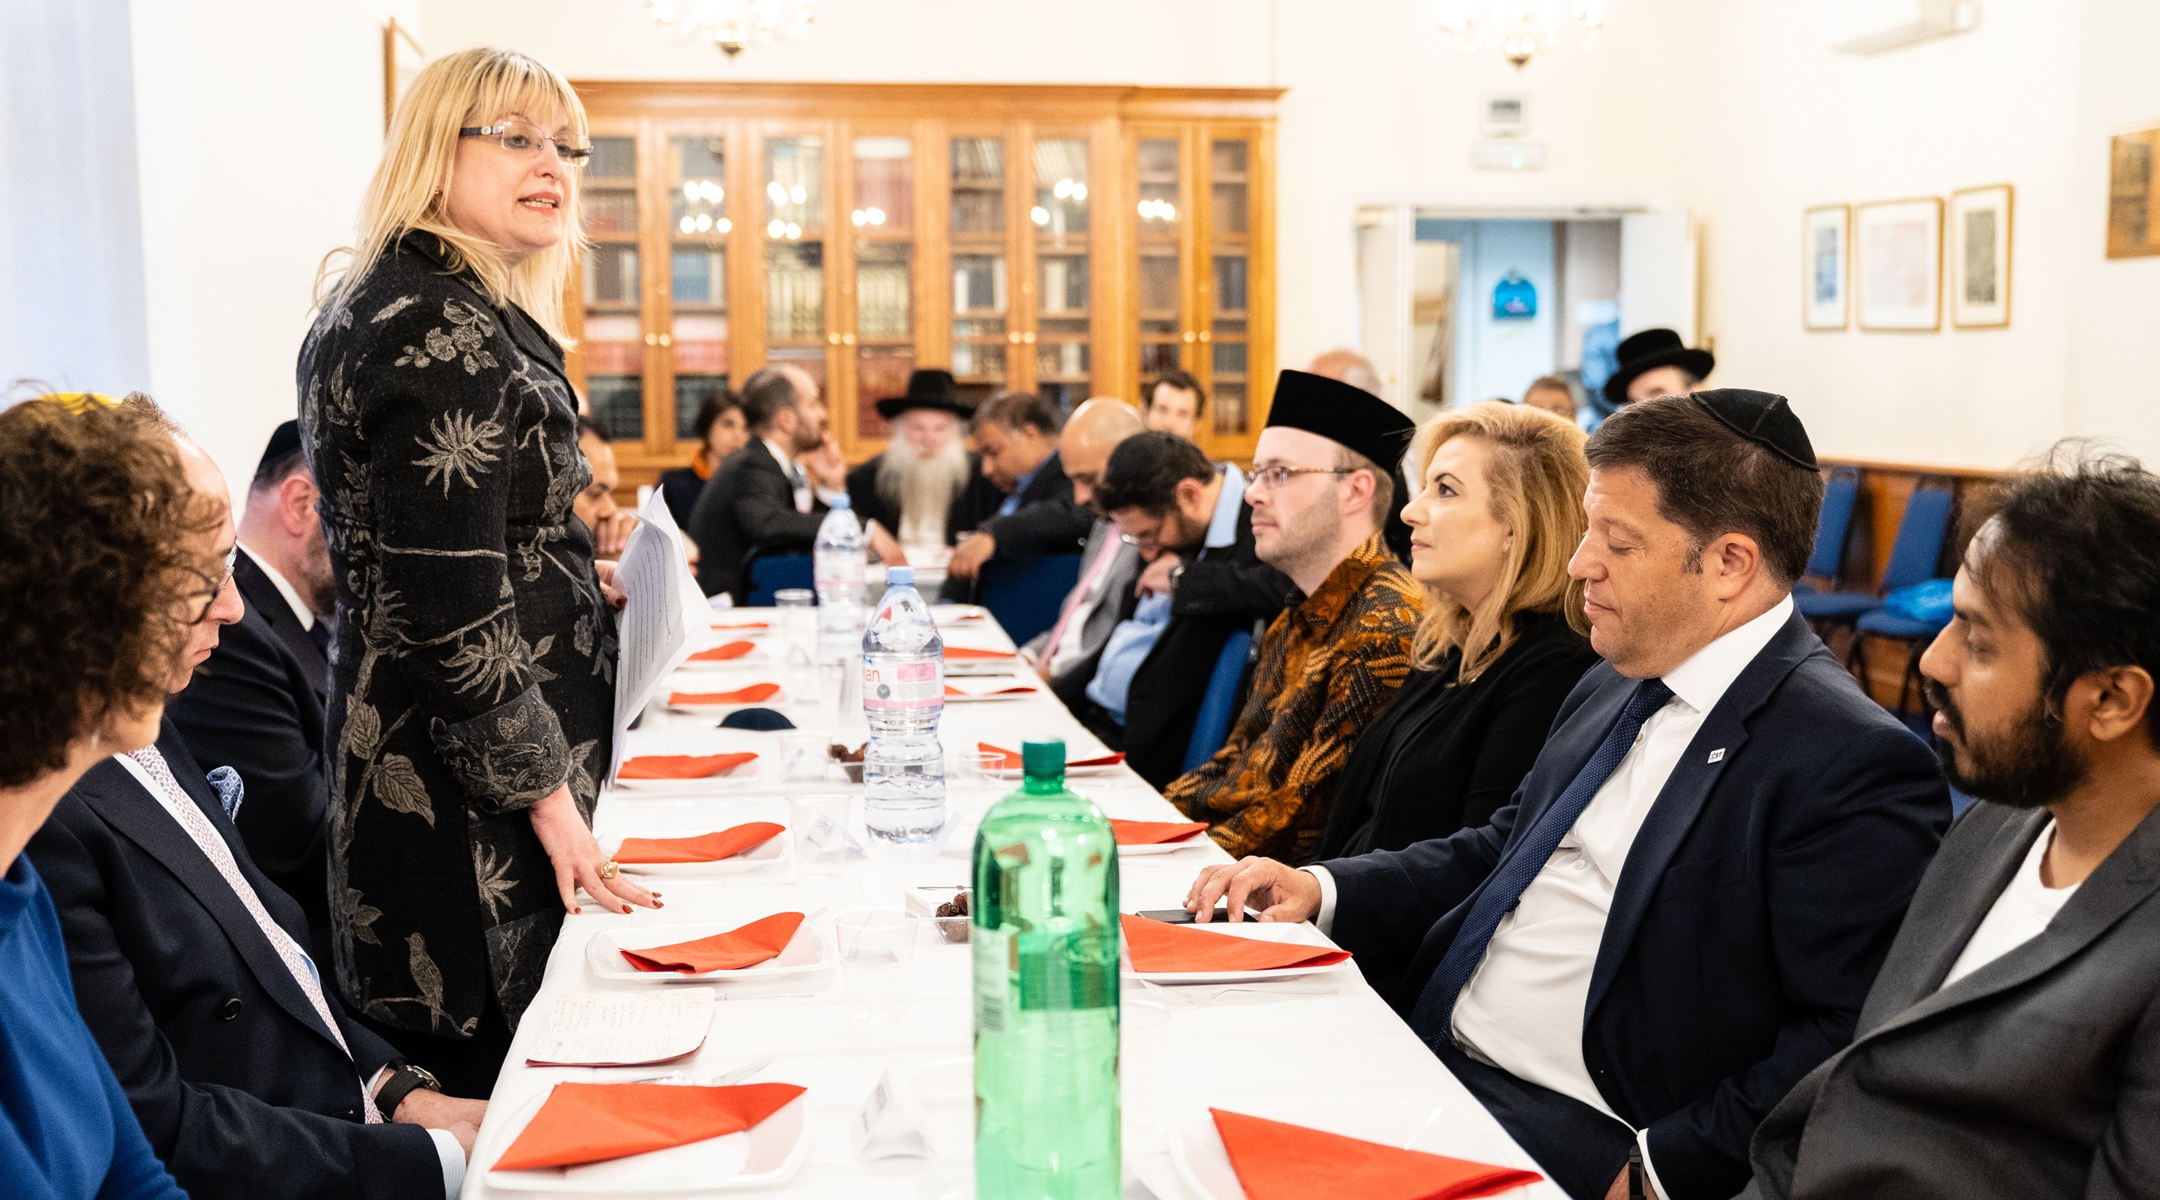 Marie van der Zyl, the president of the Board of Deputies of British Jews, attending an interfaith event in London on June 13, 2018. Courtesy of the Board of Deputies of British Jews